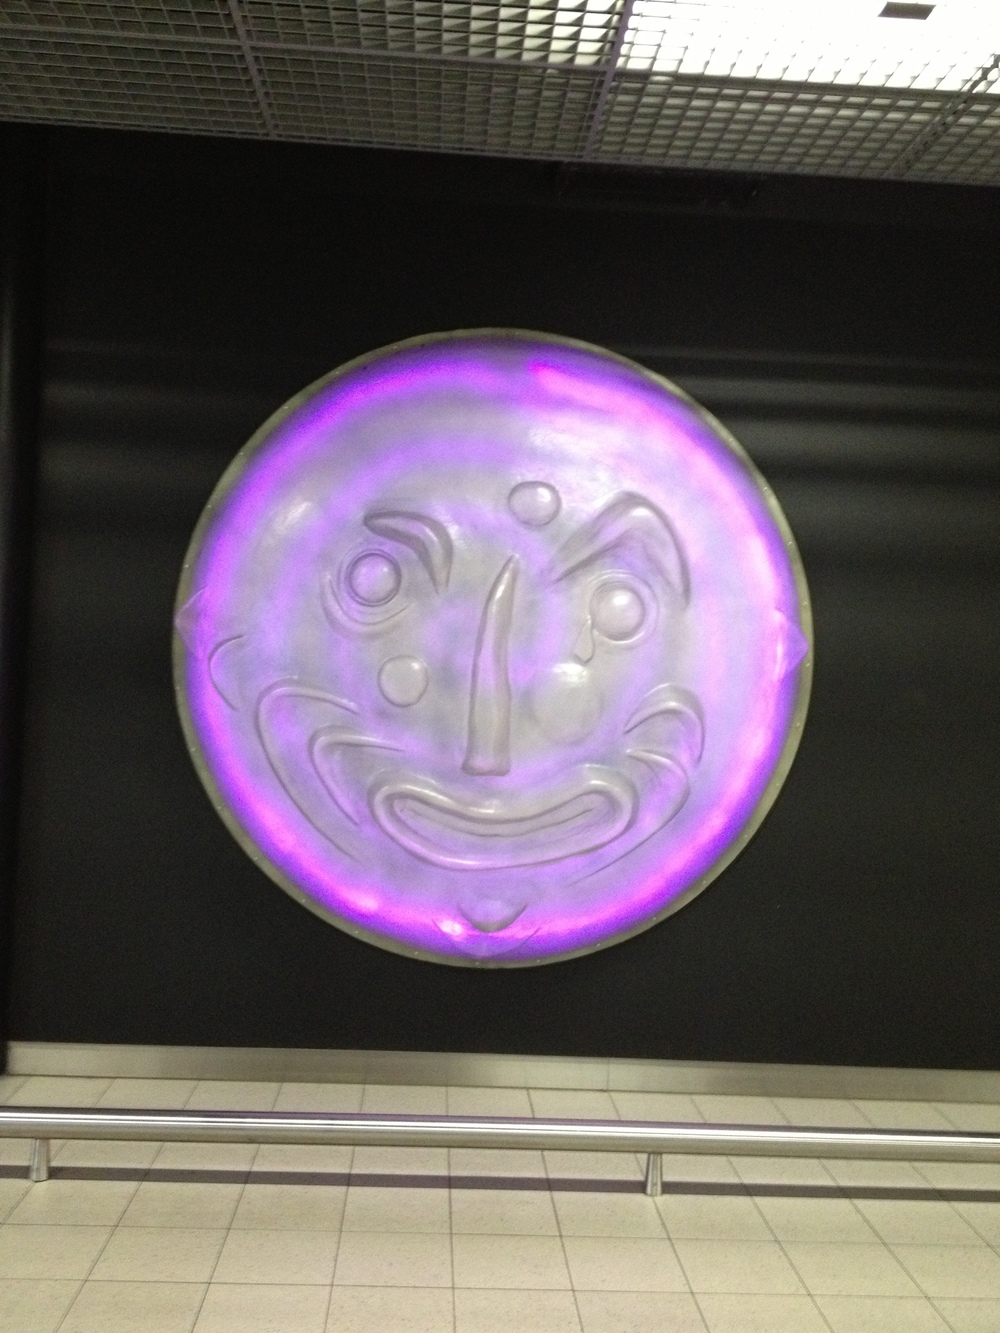 The Amsterdam airport is bustling and full of life- even at 6AM when I got there.  I spotted this glowing purple face on the wall and it really reminded me of someone... I think it's the actor in Curb Your Enthusiasm.  What do you think?